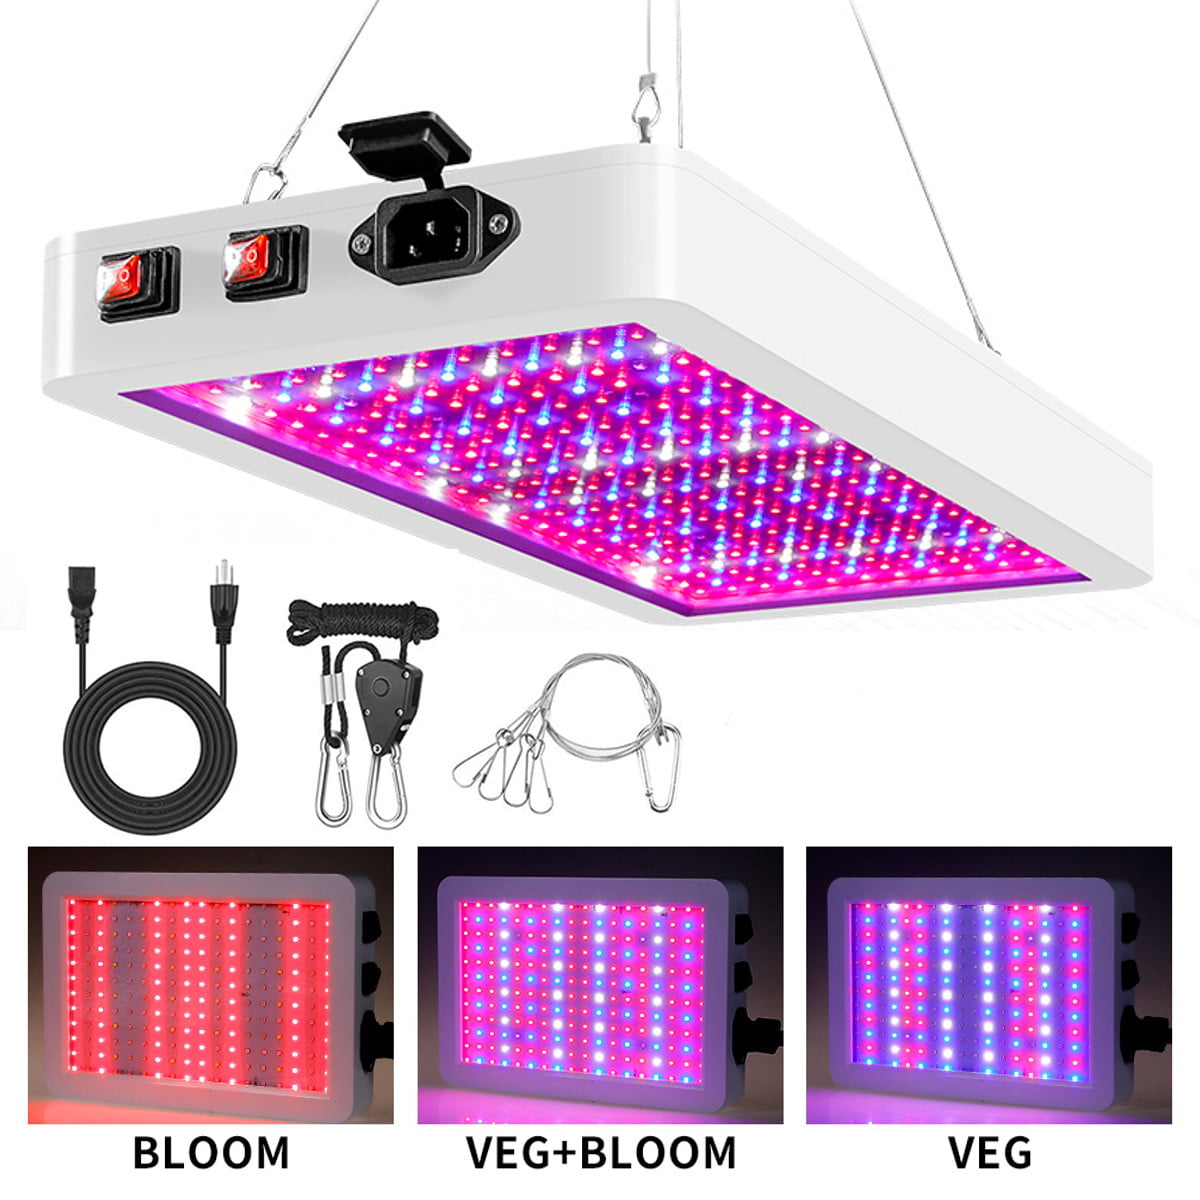 Details about   Grozy 1000W 2000W 3000W LED Grow Lights Full Spectrum For Hydroponics Grow Tent 